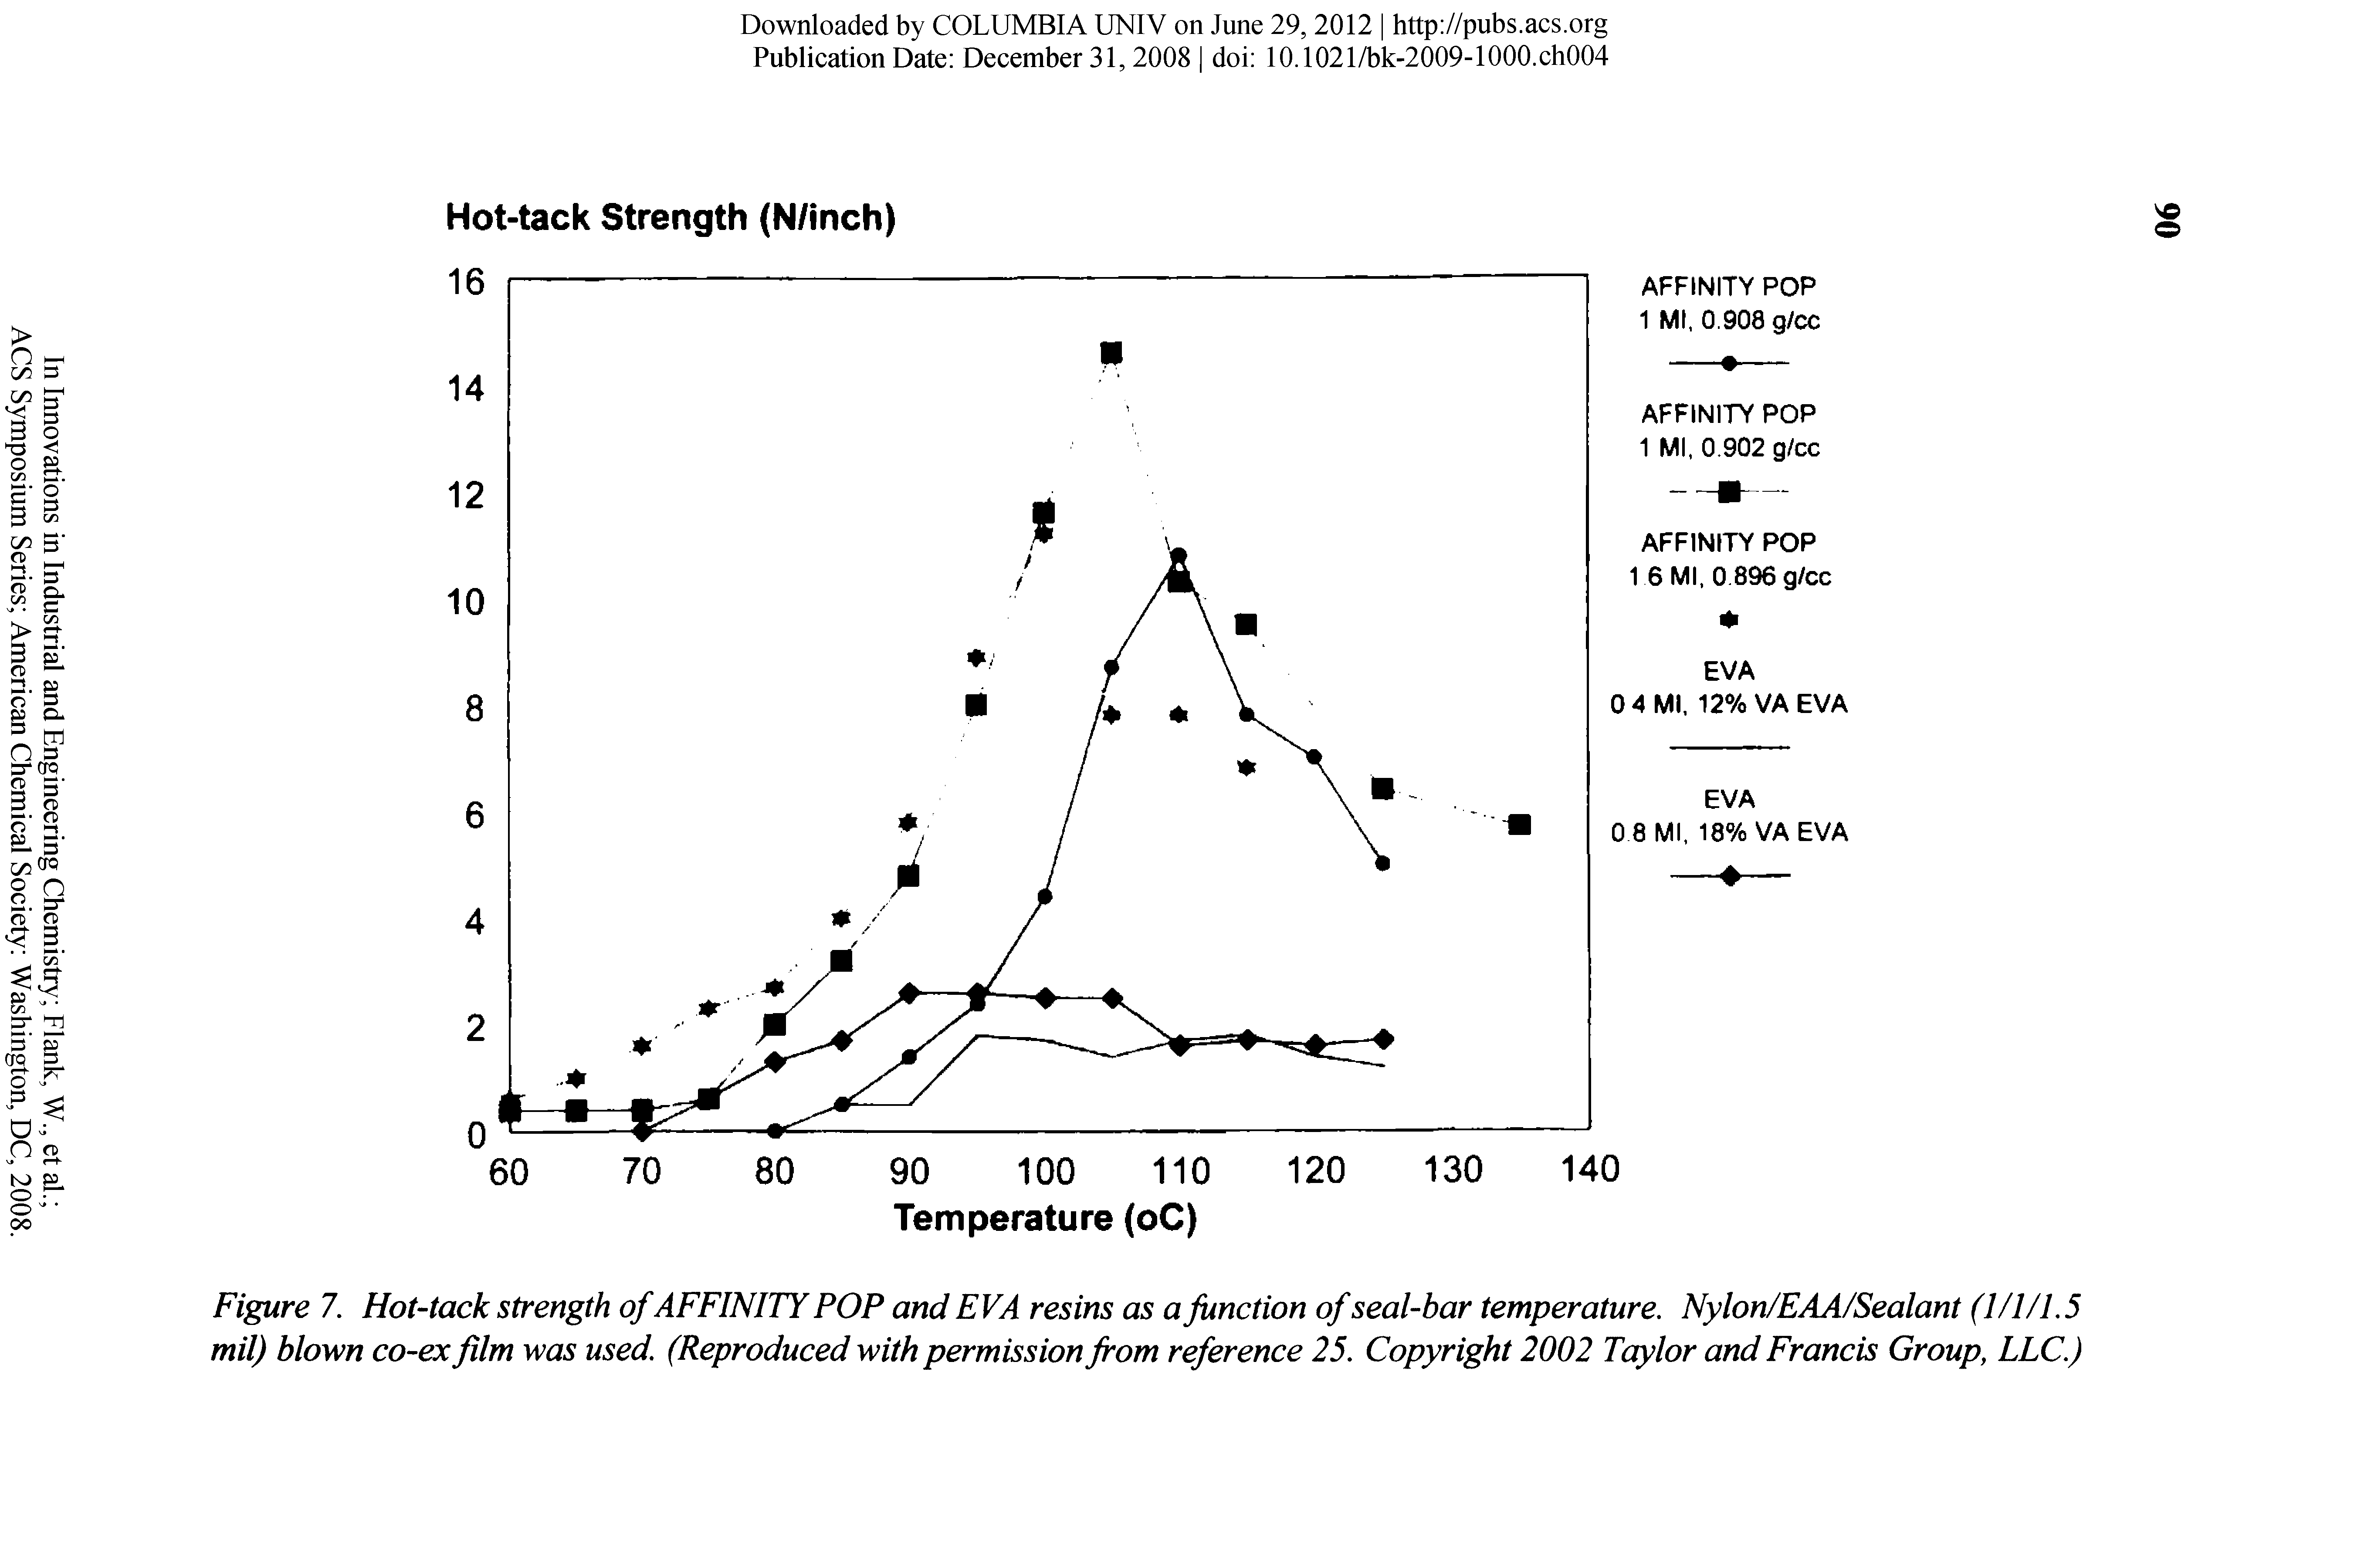 Figure 7. Hot-tack strength ofAFFINITY POP and EVA resins as a function of seal-bar temperature. Nylon/EAA/Sealant (I/I/1.5 mil) blown co-ex film was used. (Reproduced with permission from reference 25. Copyright 2002 Taylor and Francis Group, LLC.)...